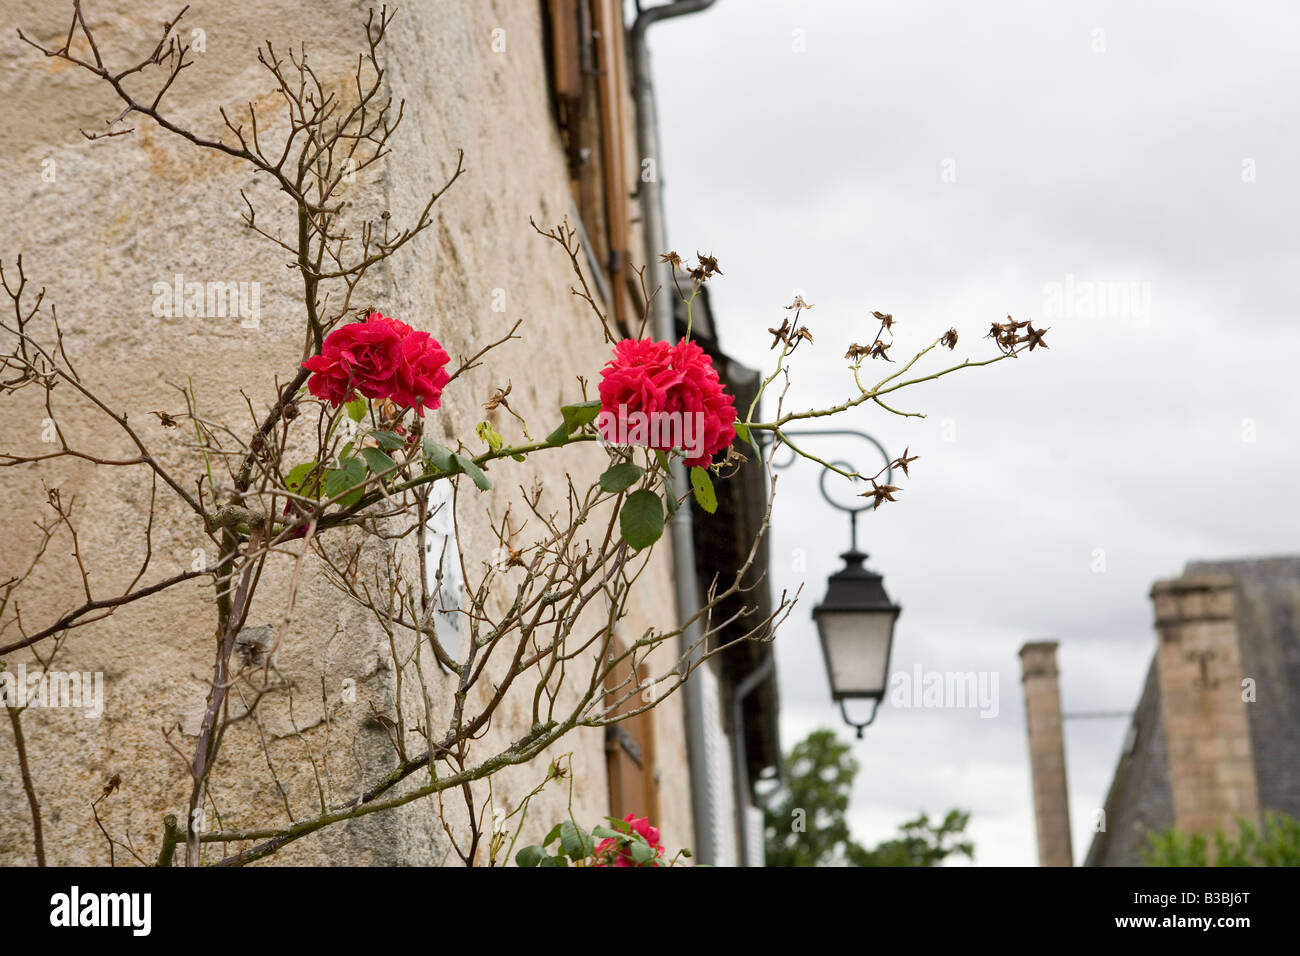 red roses climbing over a stone wall in Meymac, France Stock Photo